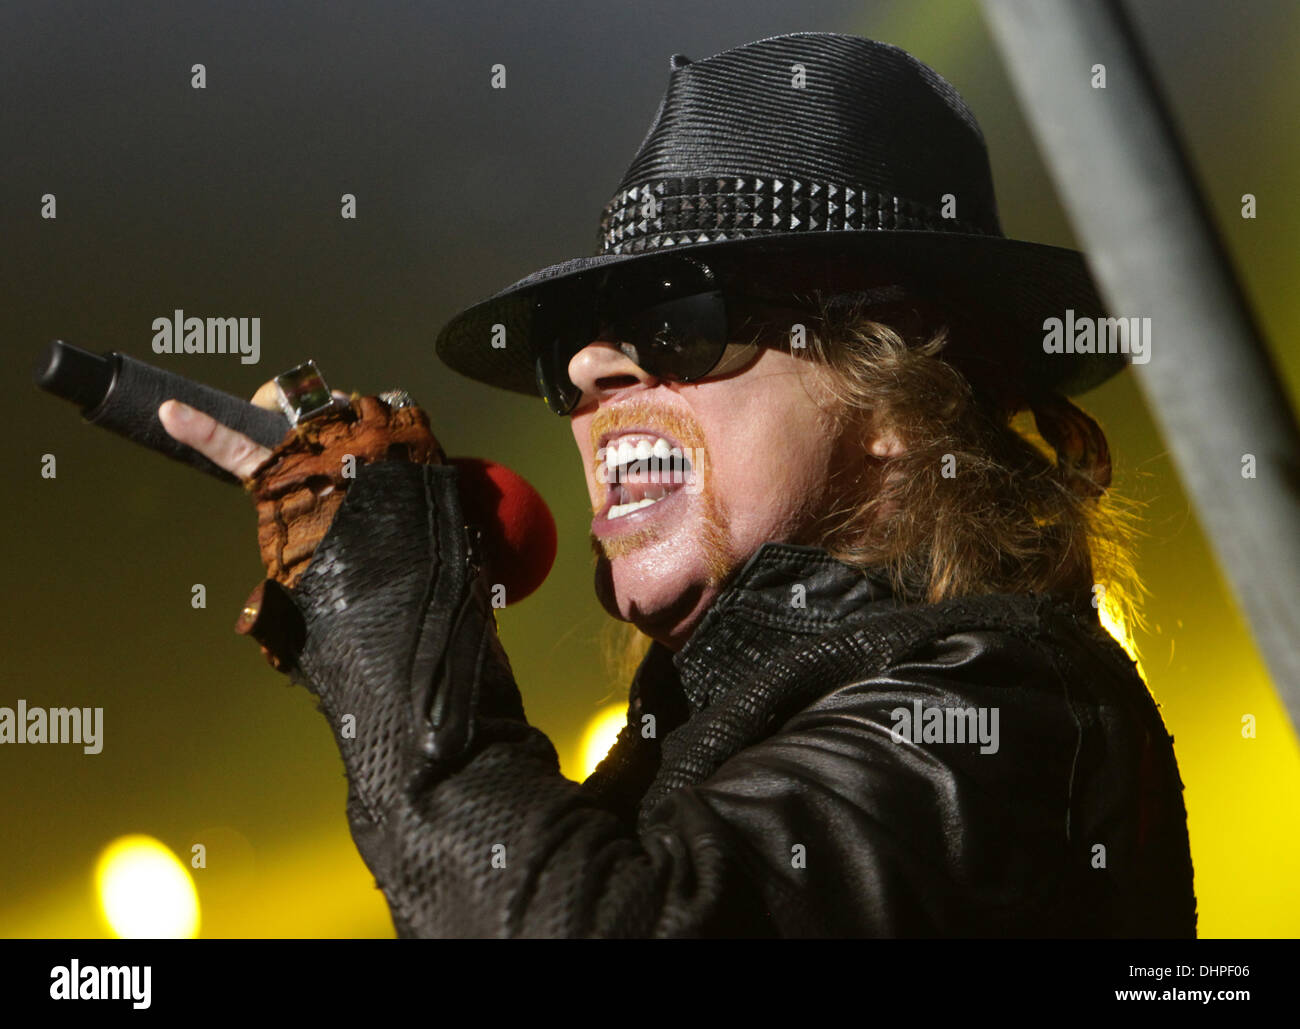 Axl Rose Guns N' Roses perform live in Moscow Moscow, Russia - 12.05.12  Stock Photo - Alamy